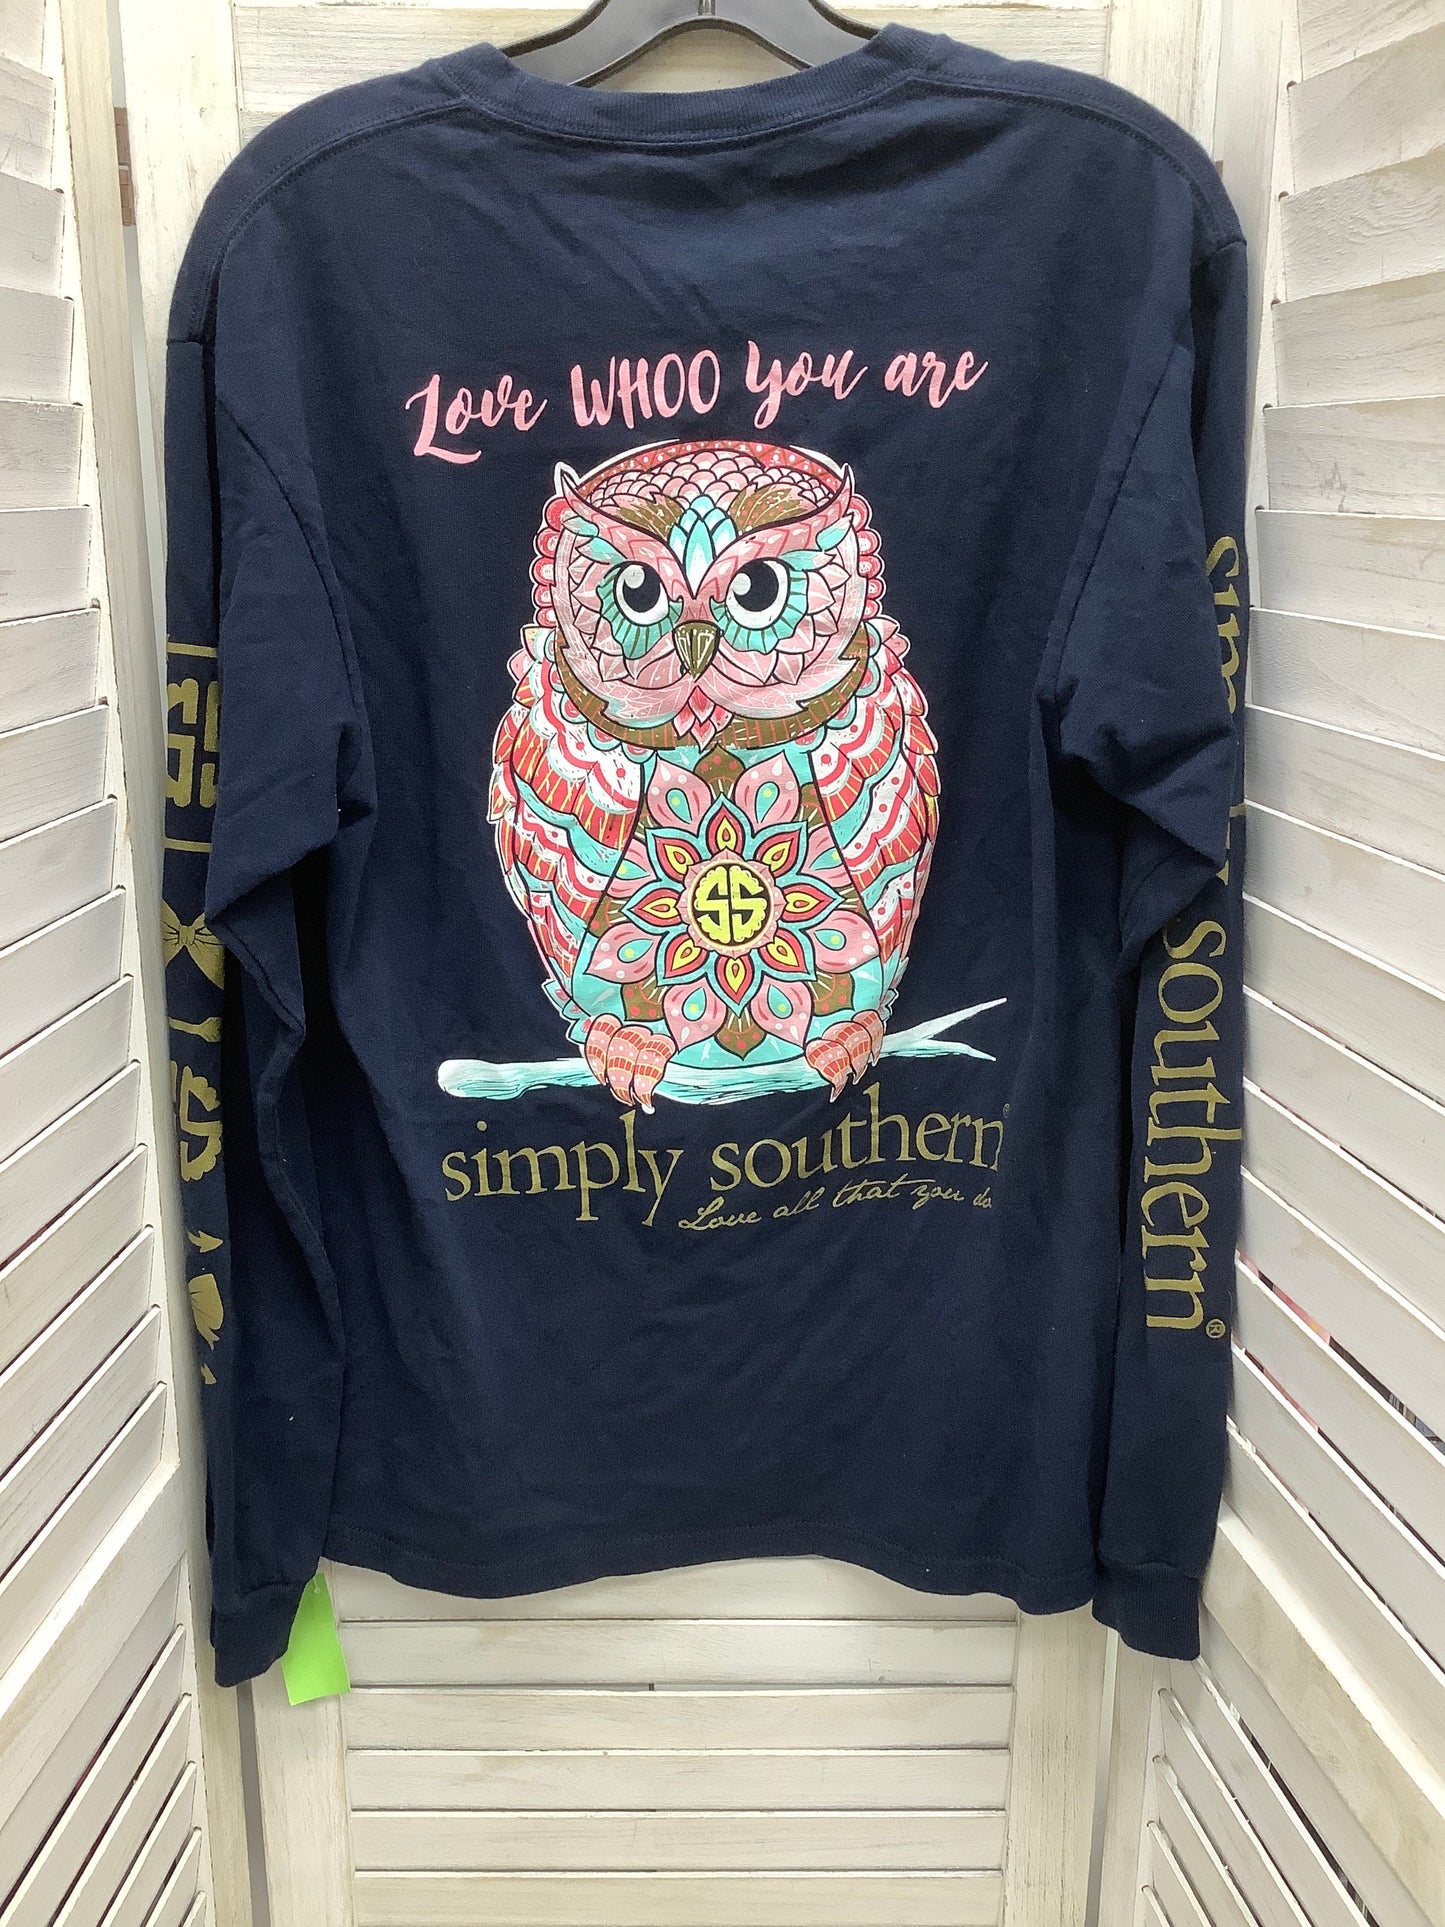 Multi-colored Top Long Sleeve Basic Simply Southern, Size M